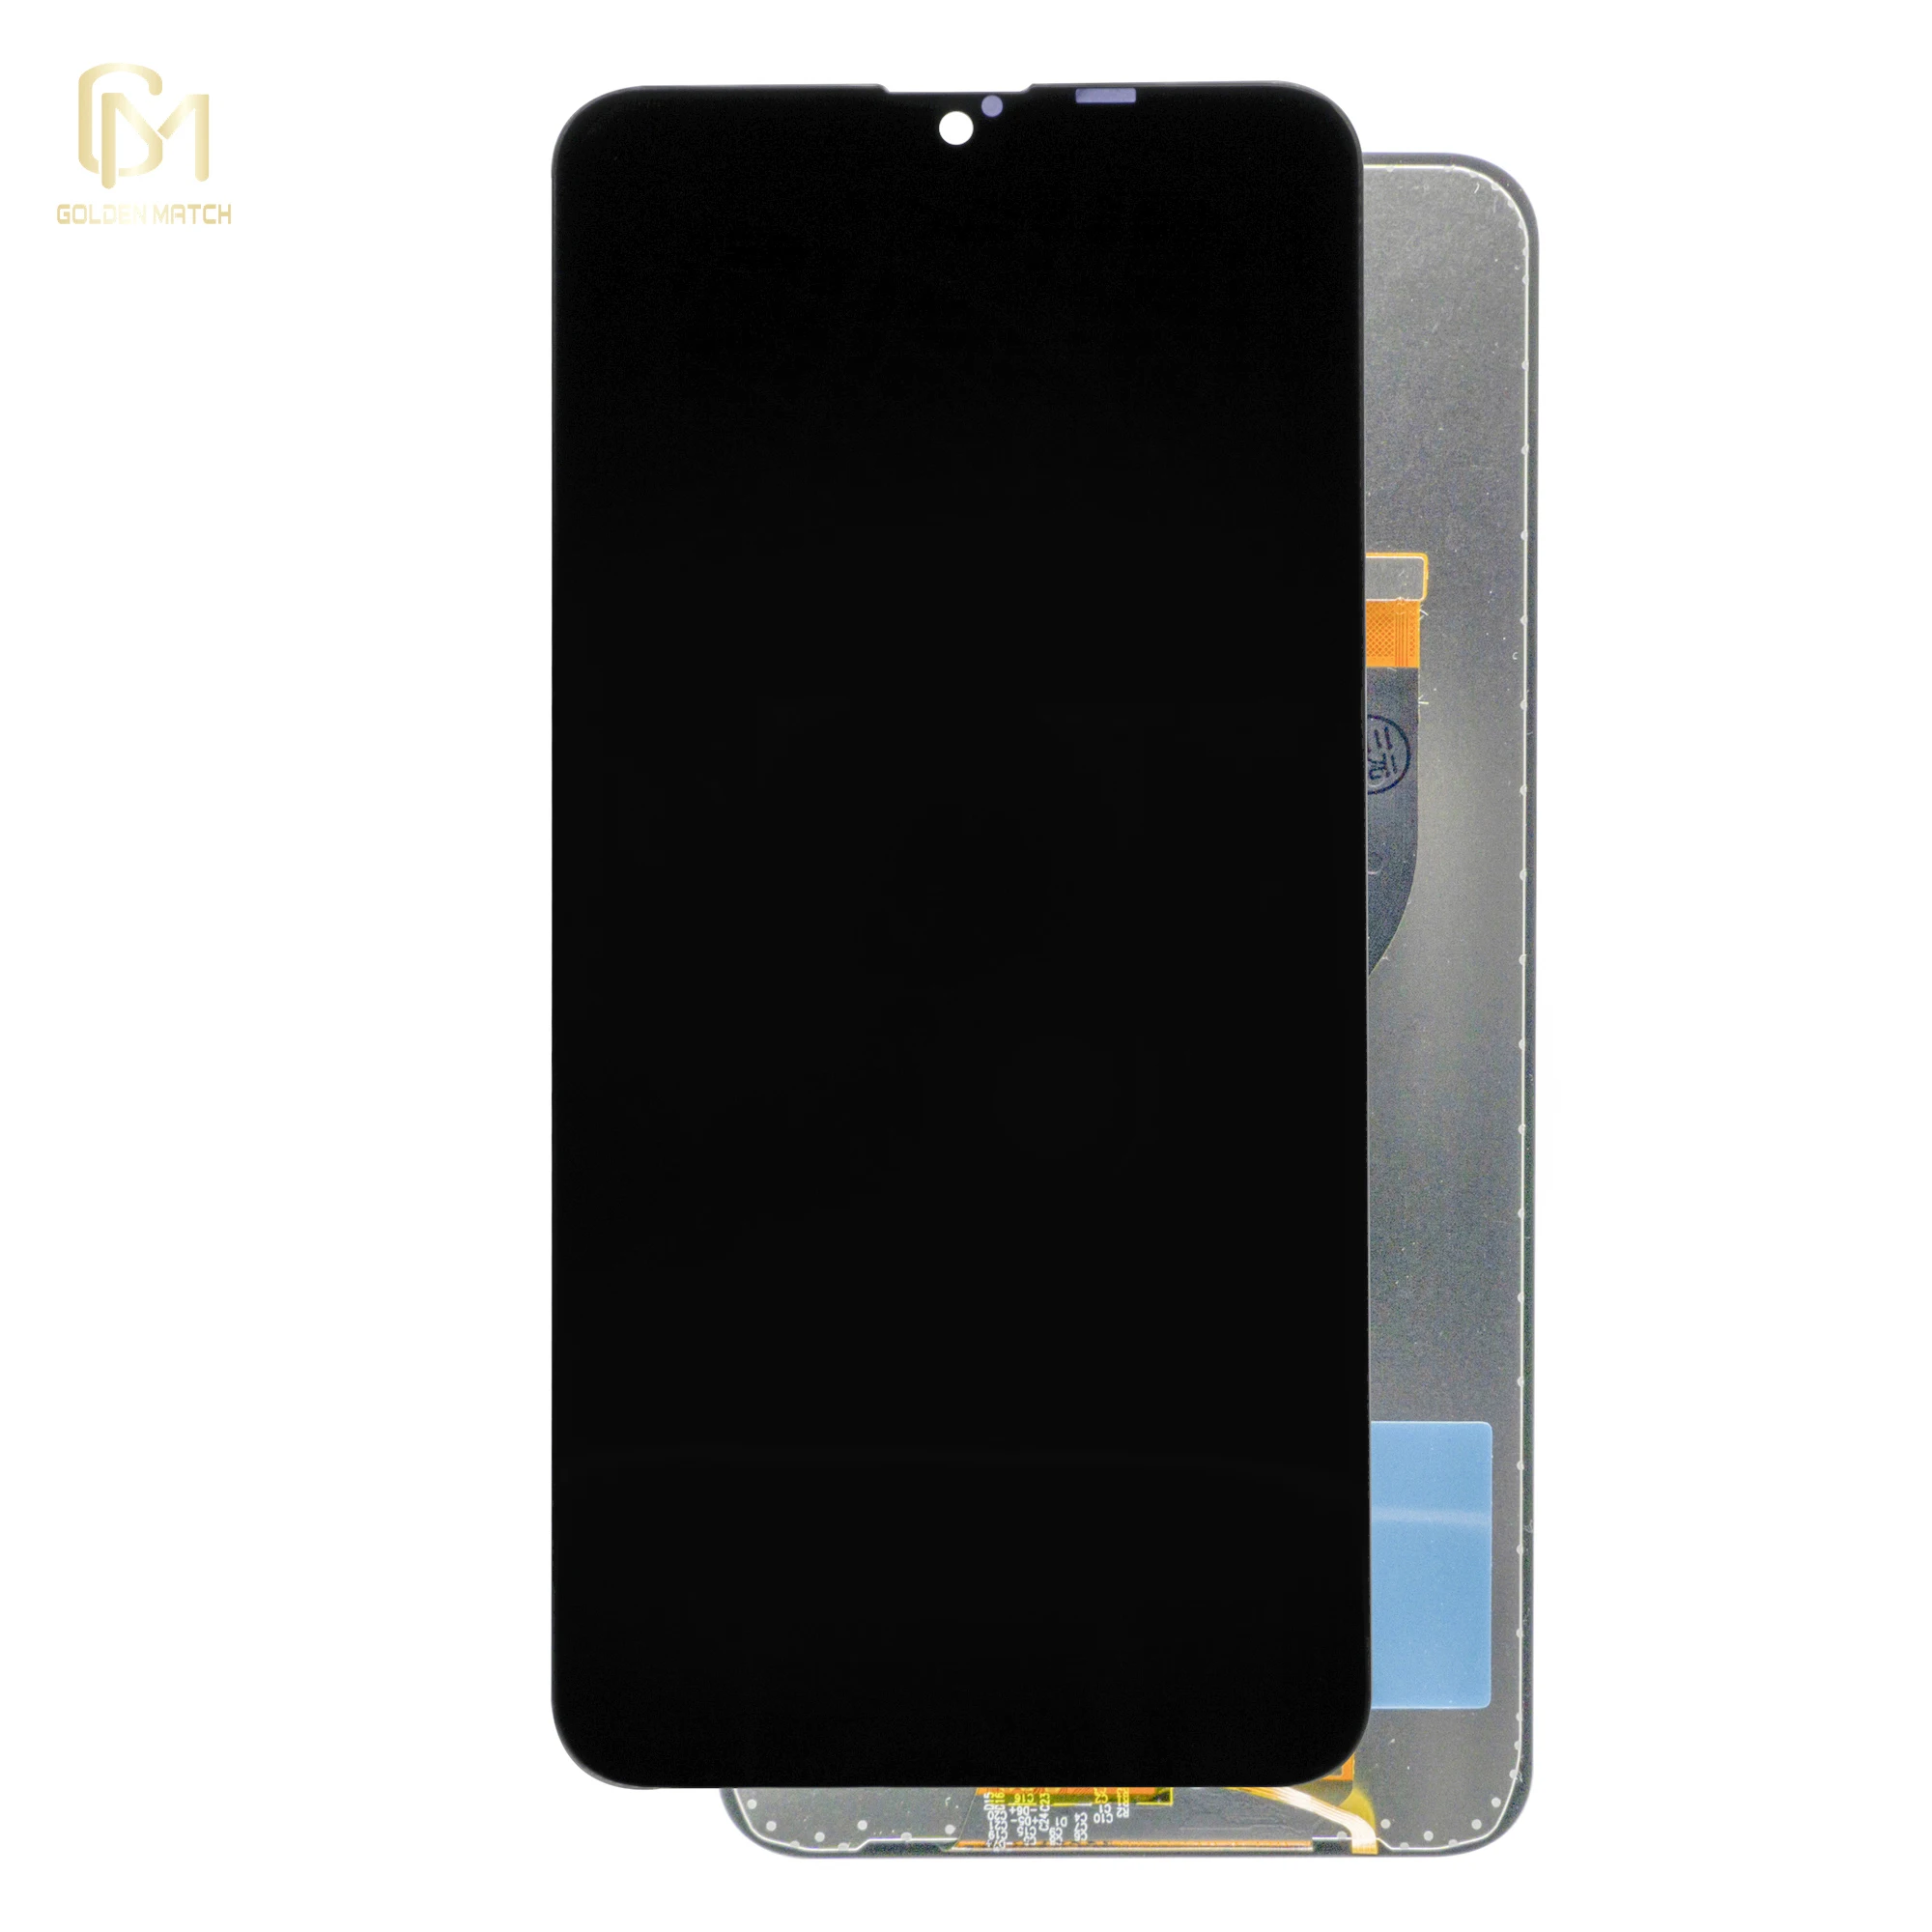 

A12 A02 lcd screen for Samsung galaxy a022 a32 display With touch screen replacement, Black